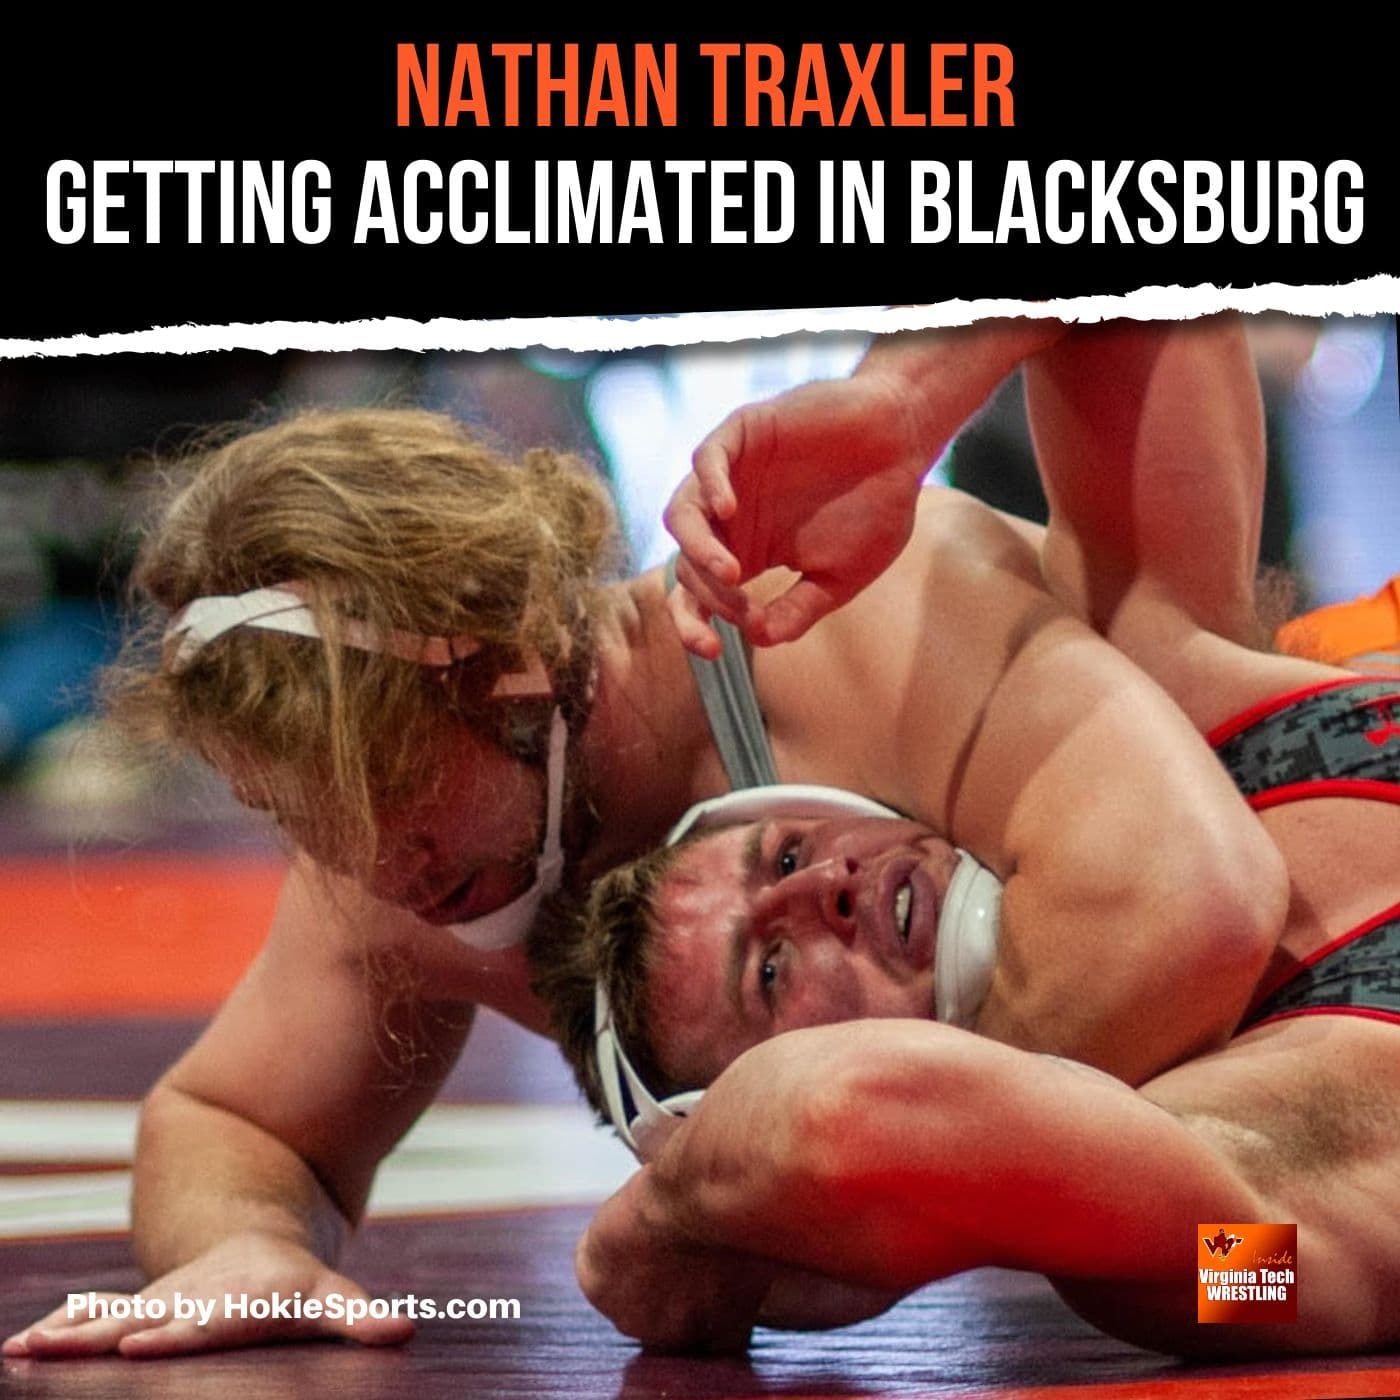 Nathan Traxler acclimates to Blacksburg and a new weight class - VT105